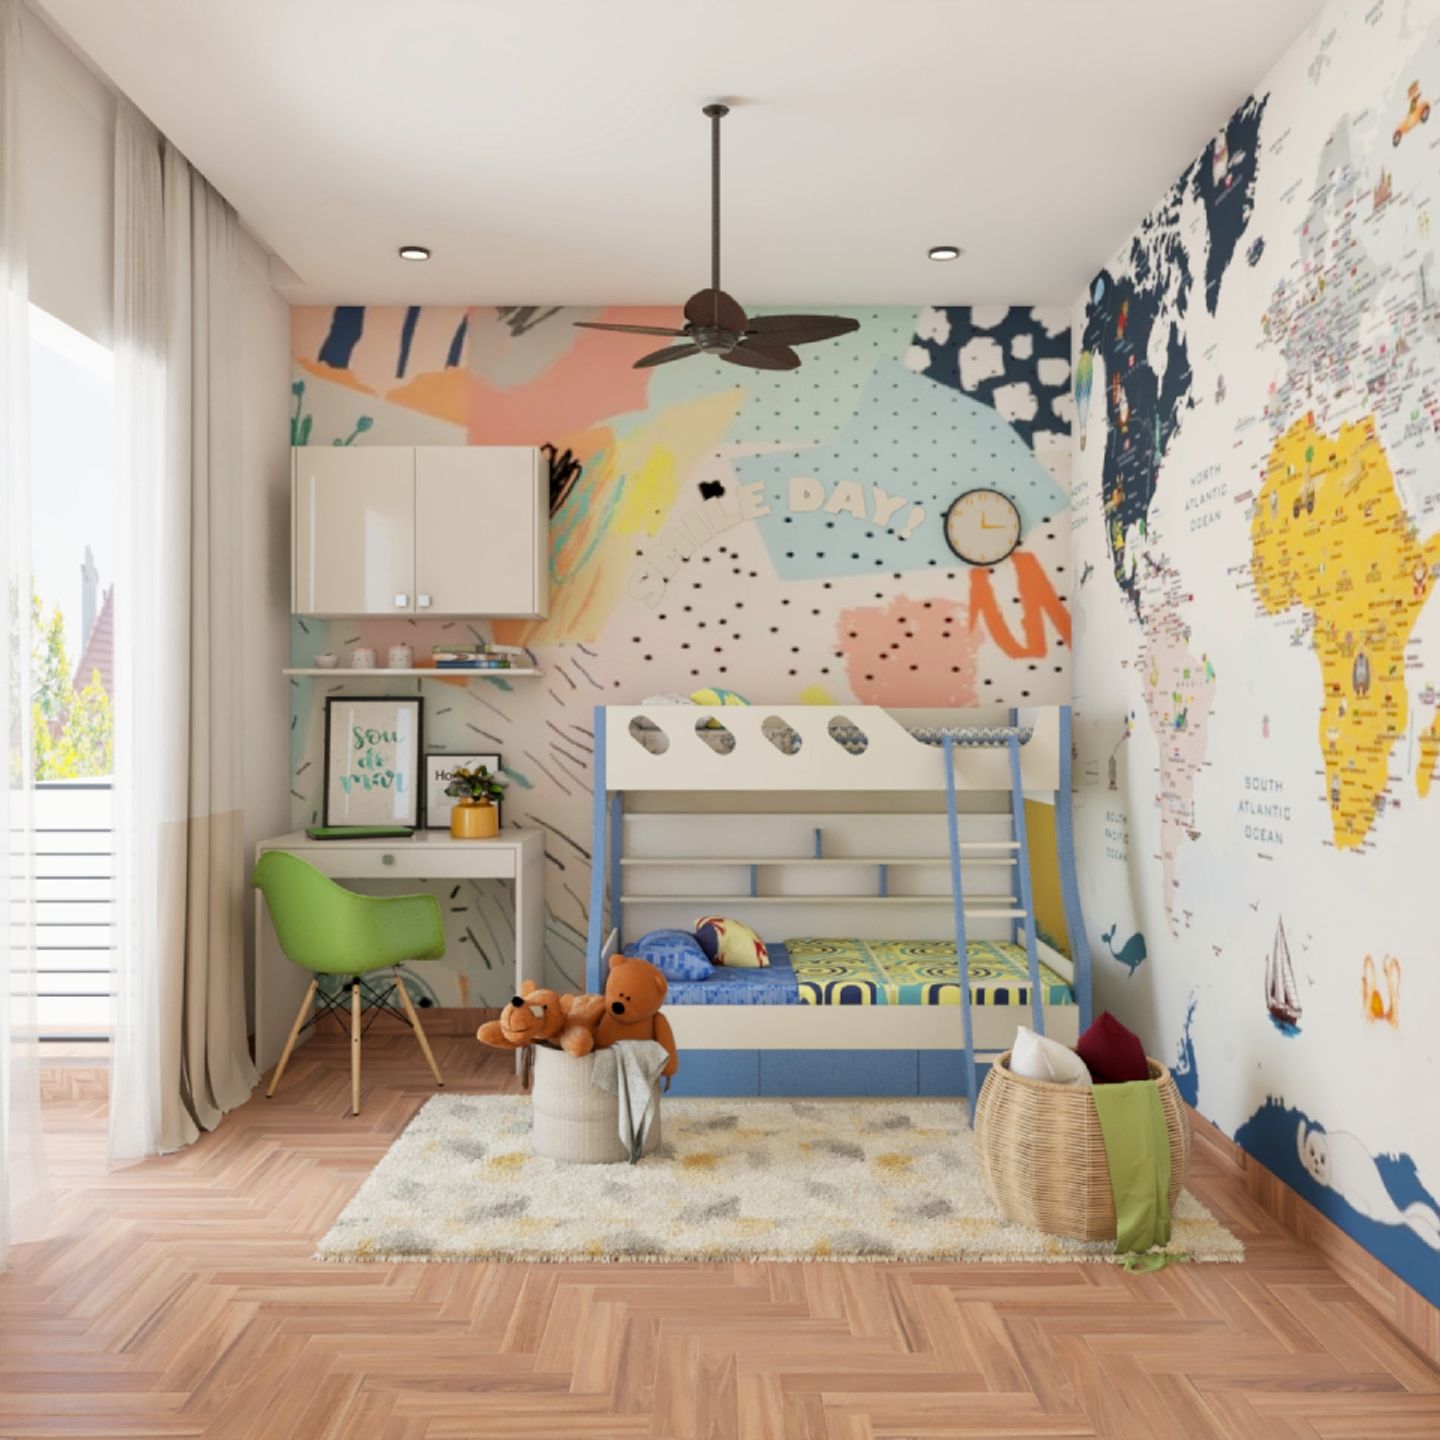 Compact Kid's Bedroom Design With Colourful Pictures - Livspace